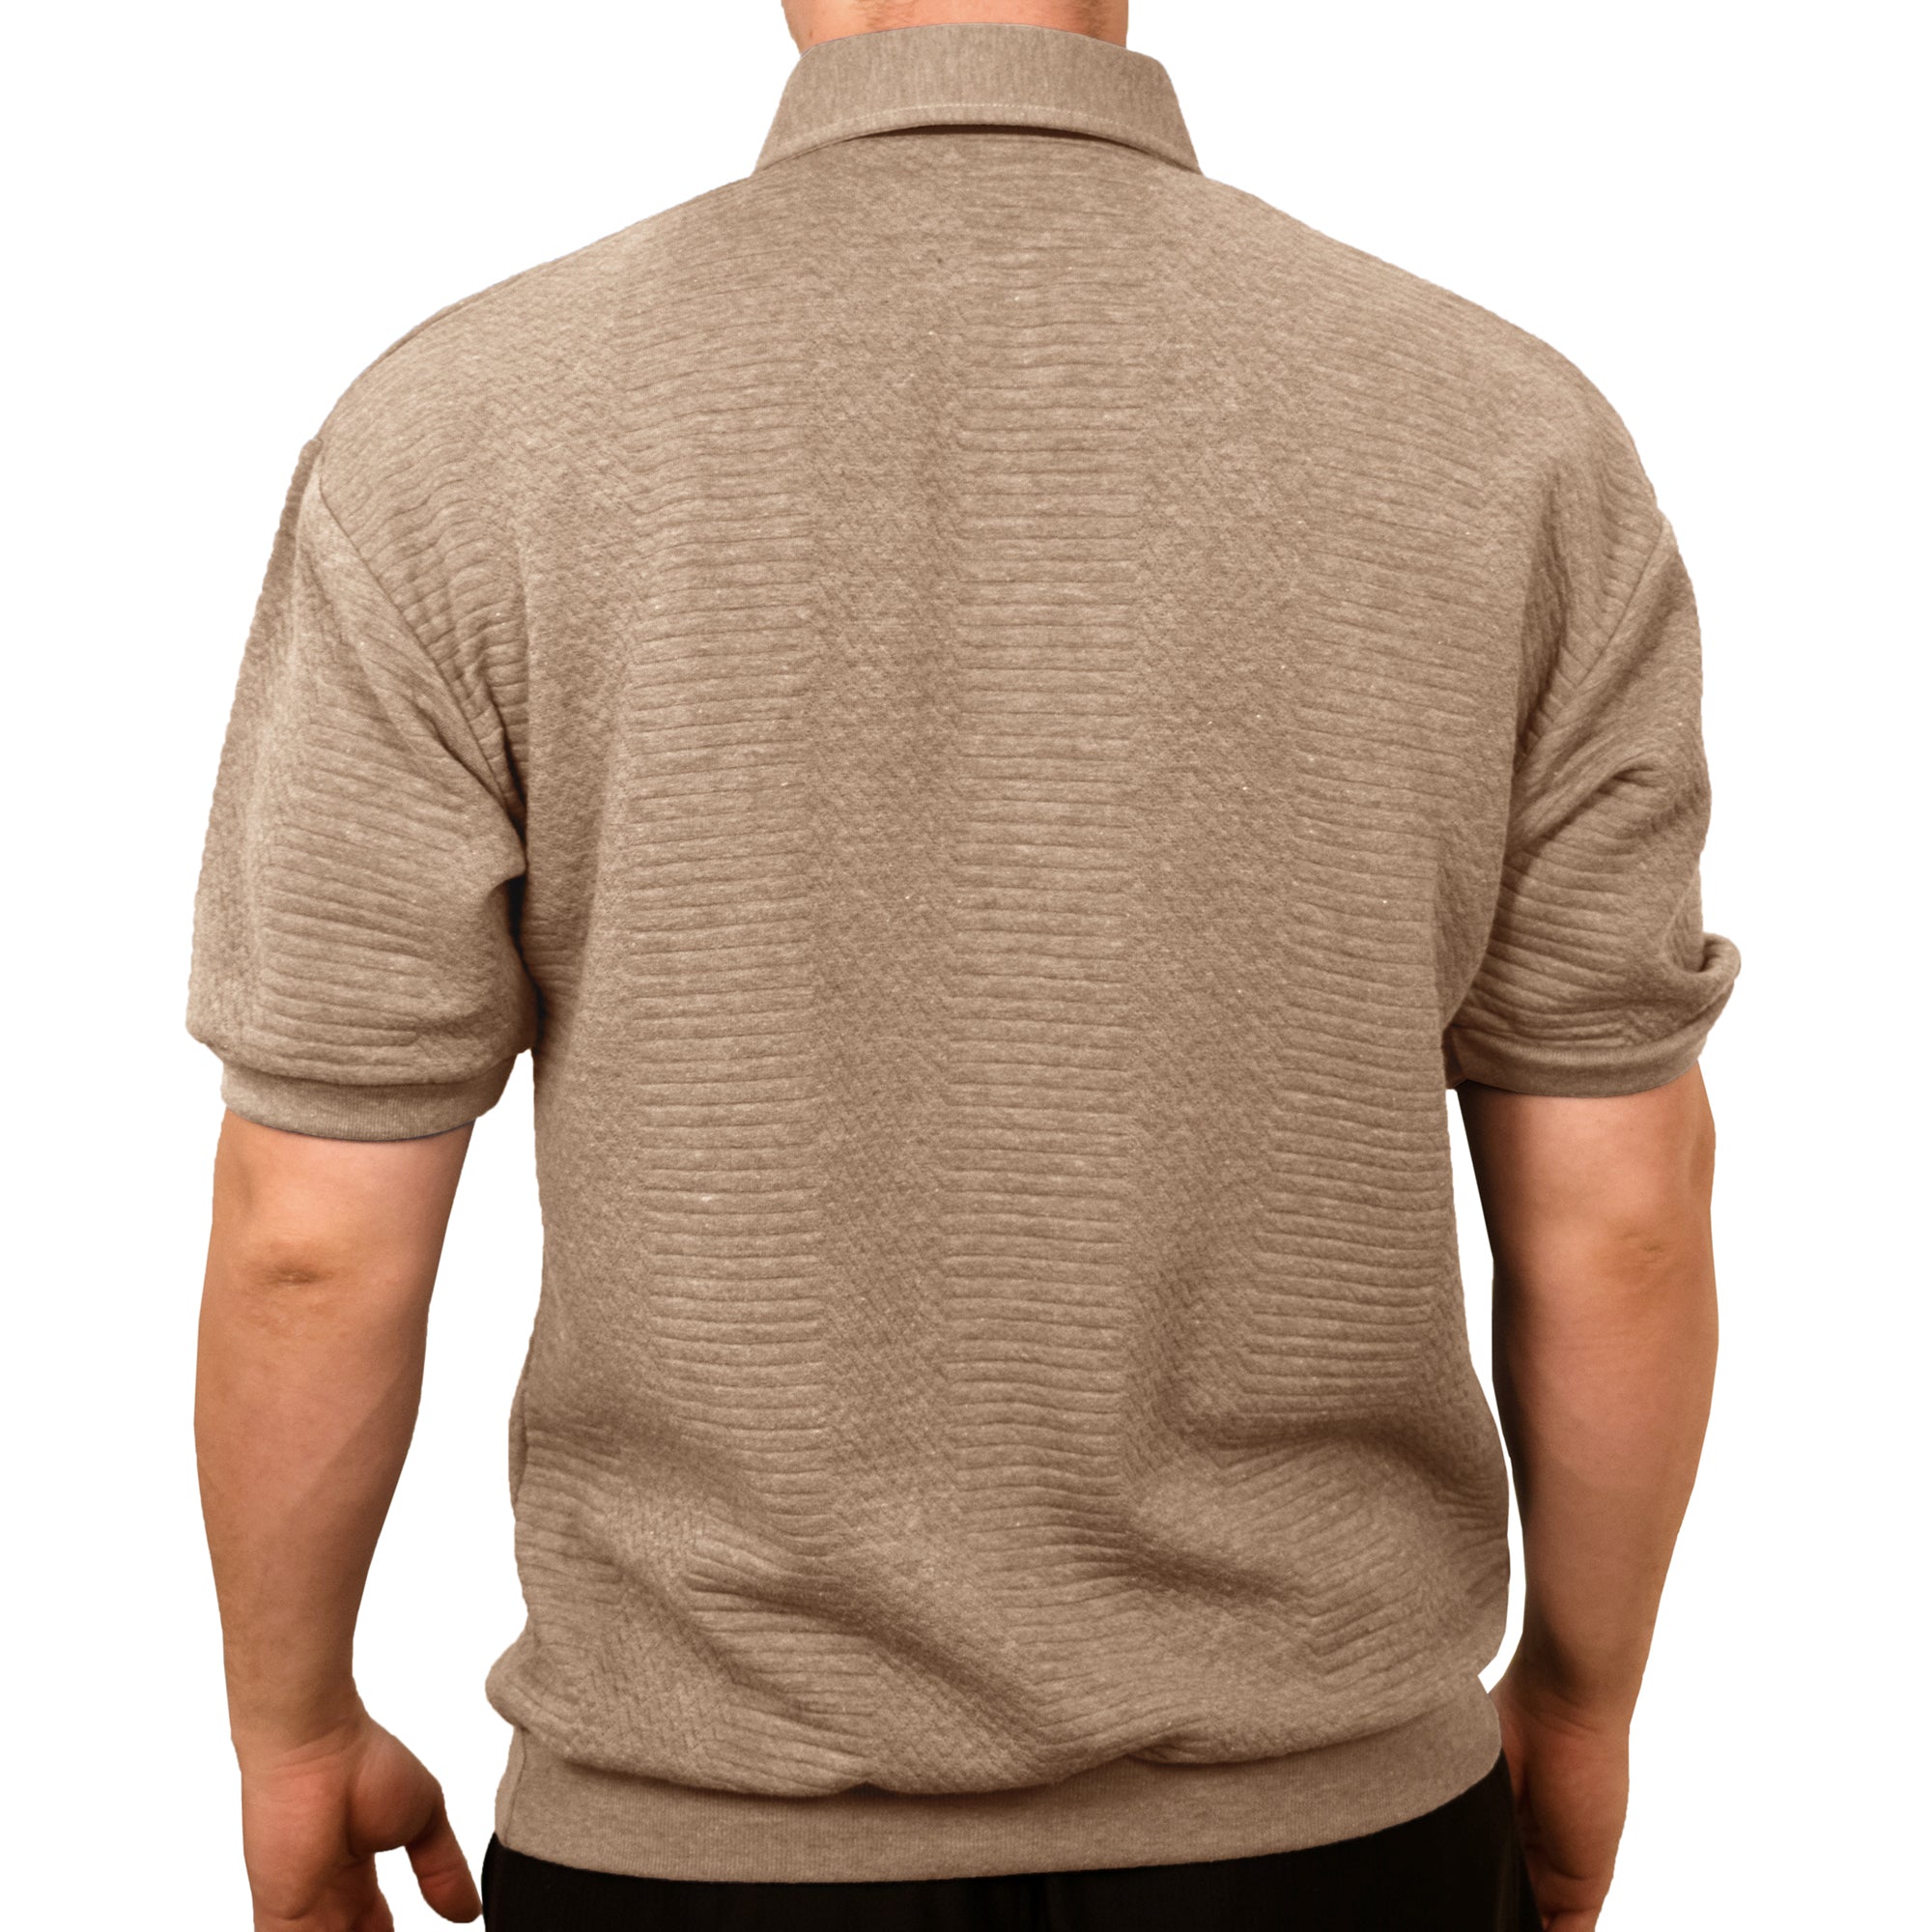 Classics by Palmland French Terry Short Sleeve  Banded Bottom Shirt 6090-720 Taupe HT - bandedbottom